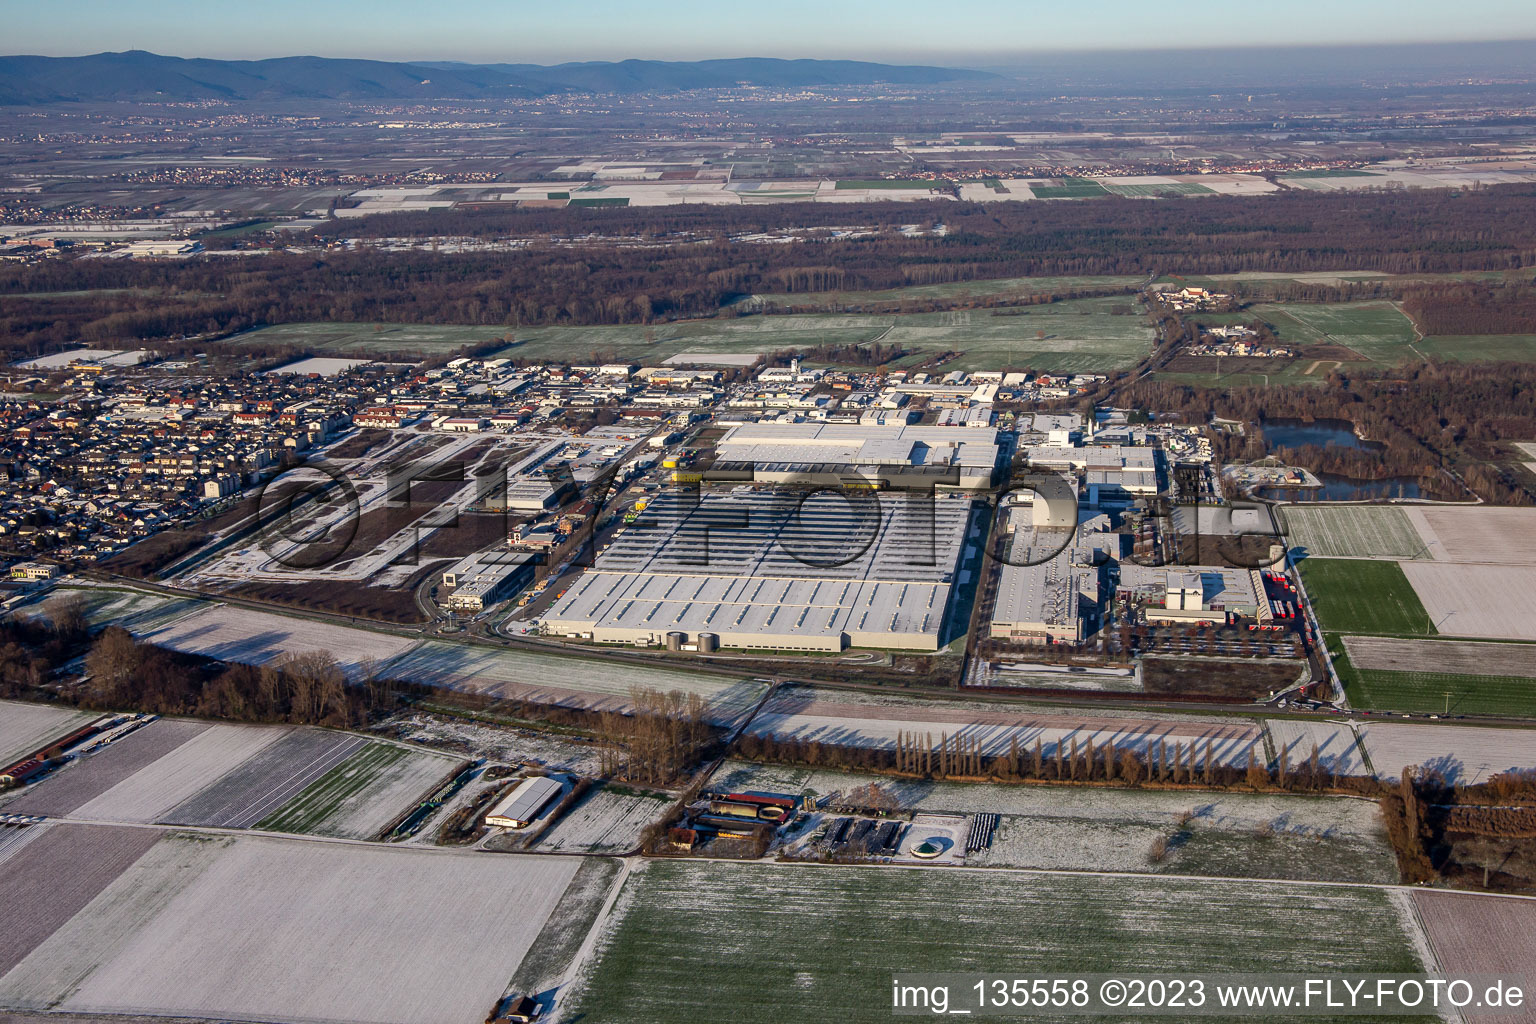 Aerial view of Interpark industrial area in winter with snow in Offenbach an der Queich in the state Rhineland-Palatinate, Germany